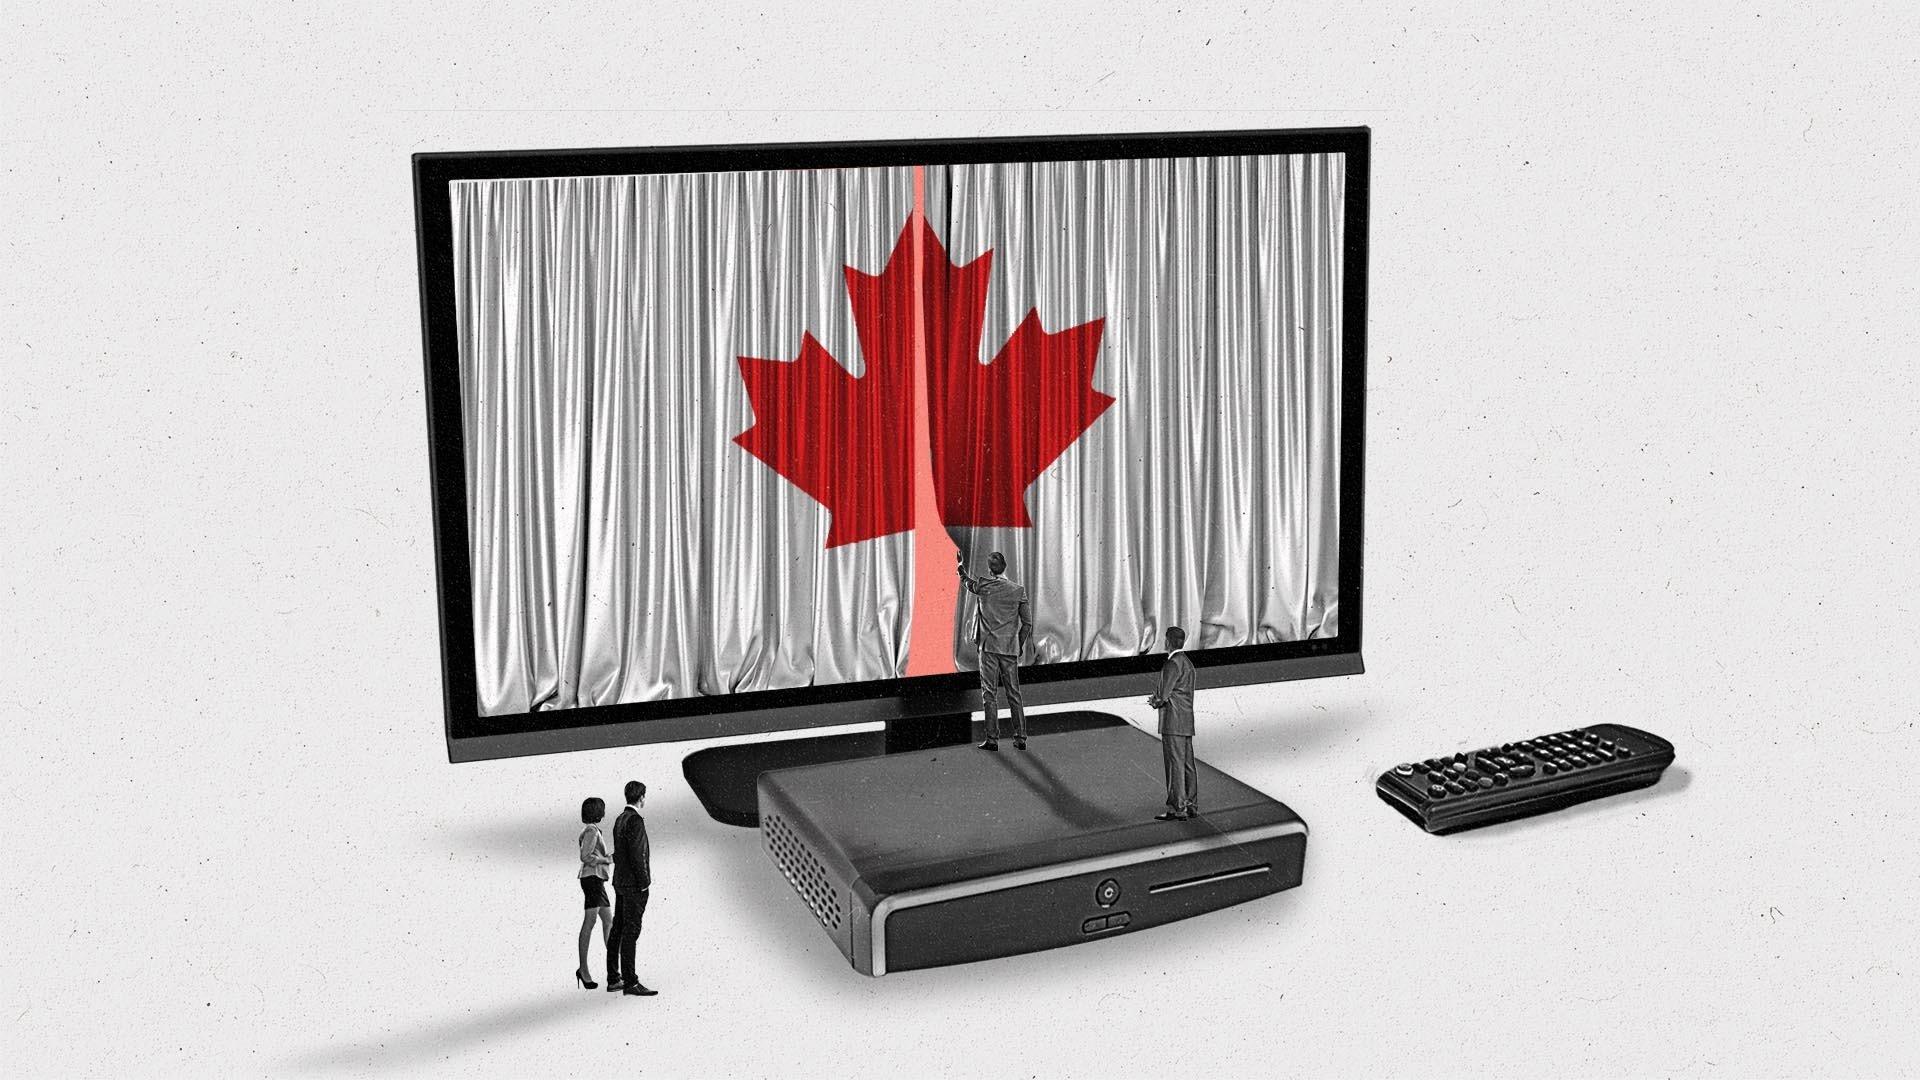 A group of businesspeople approach an oversized connected TV and pull back the red maple leaf curtain on the screen.